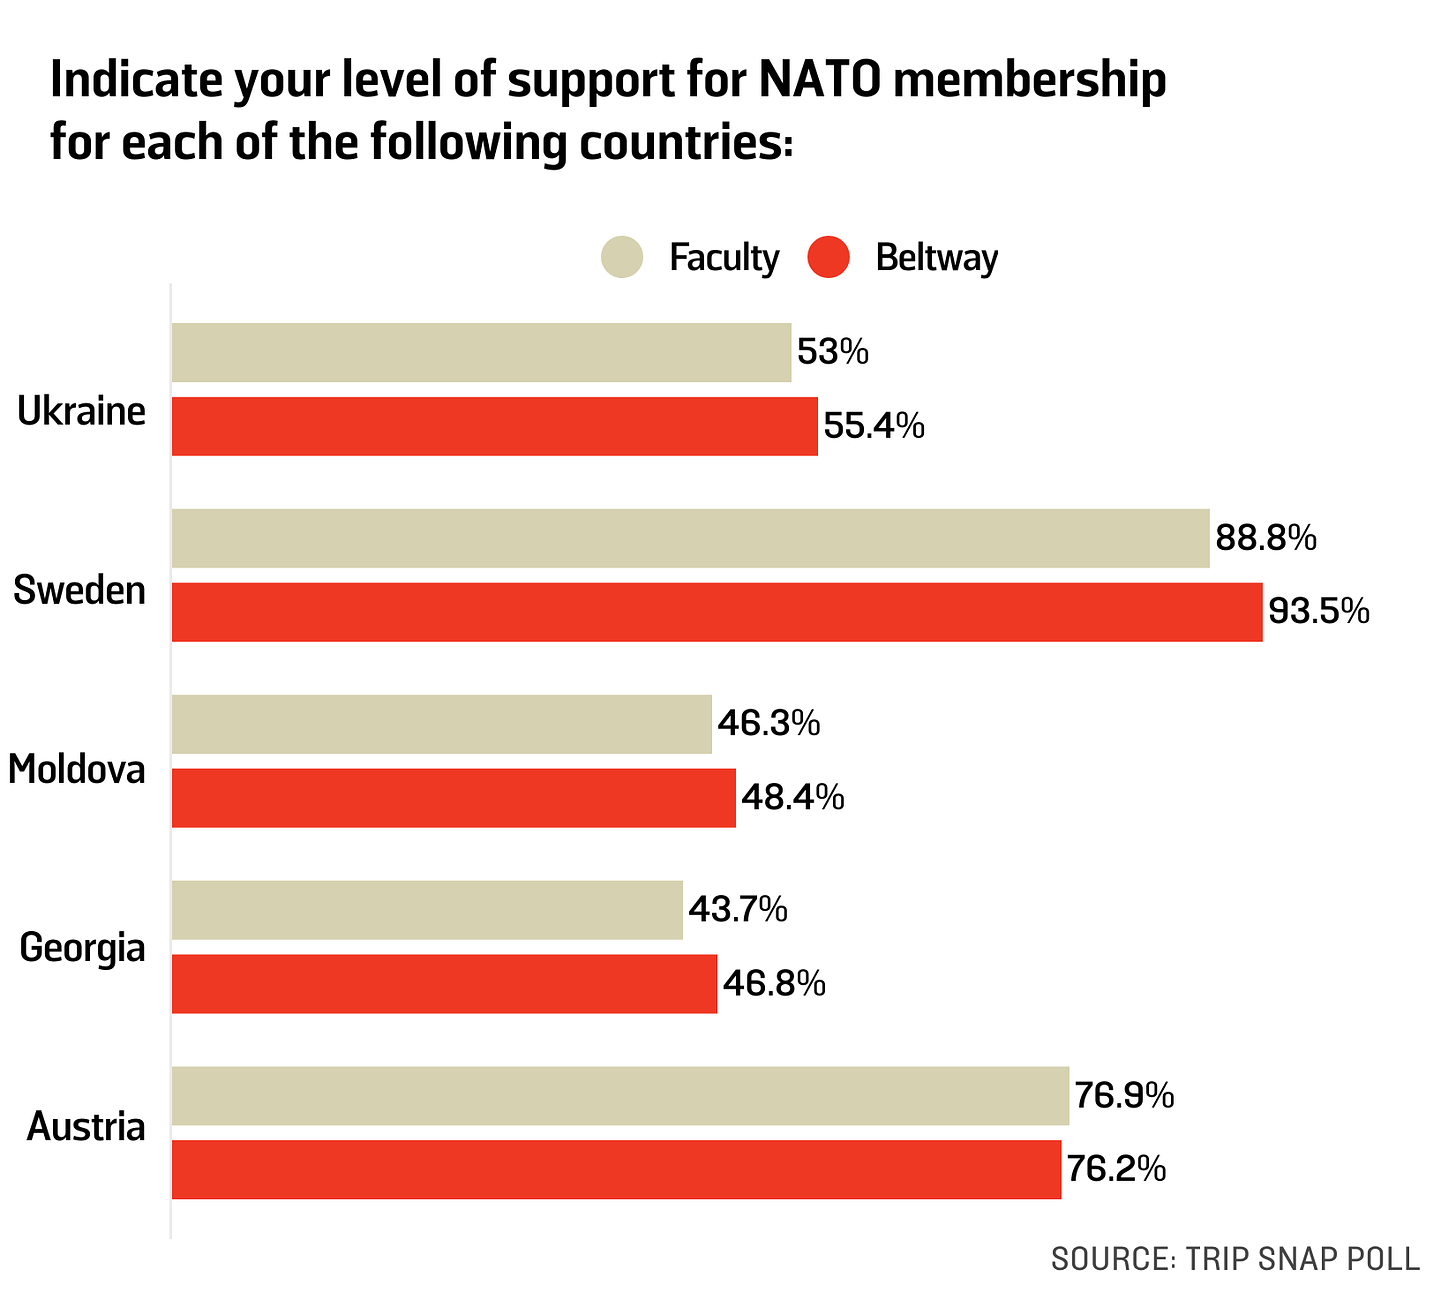 A Trip Snap poll bar chart slows level of support for NATO membership for Ukraine, Sweden, Moldova, Georgia, and Austria among faculty members and members of the Beltway. Support in both cohorts was highest for Sweden (around 90%), then Austria (around 76%), with Ukraine at around 50%.